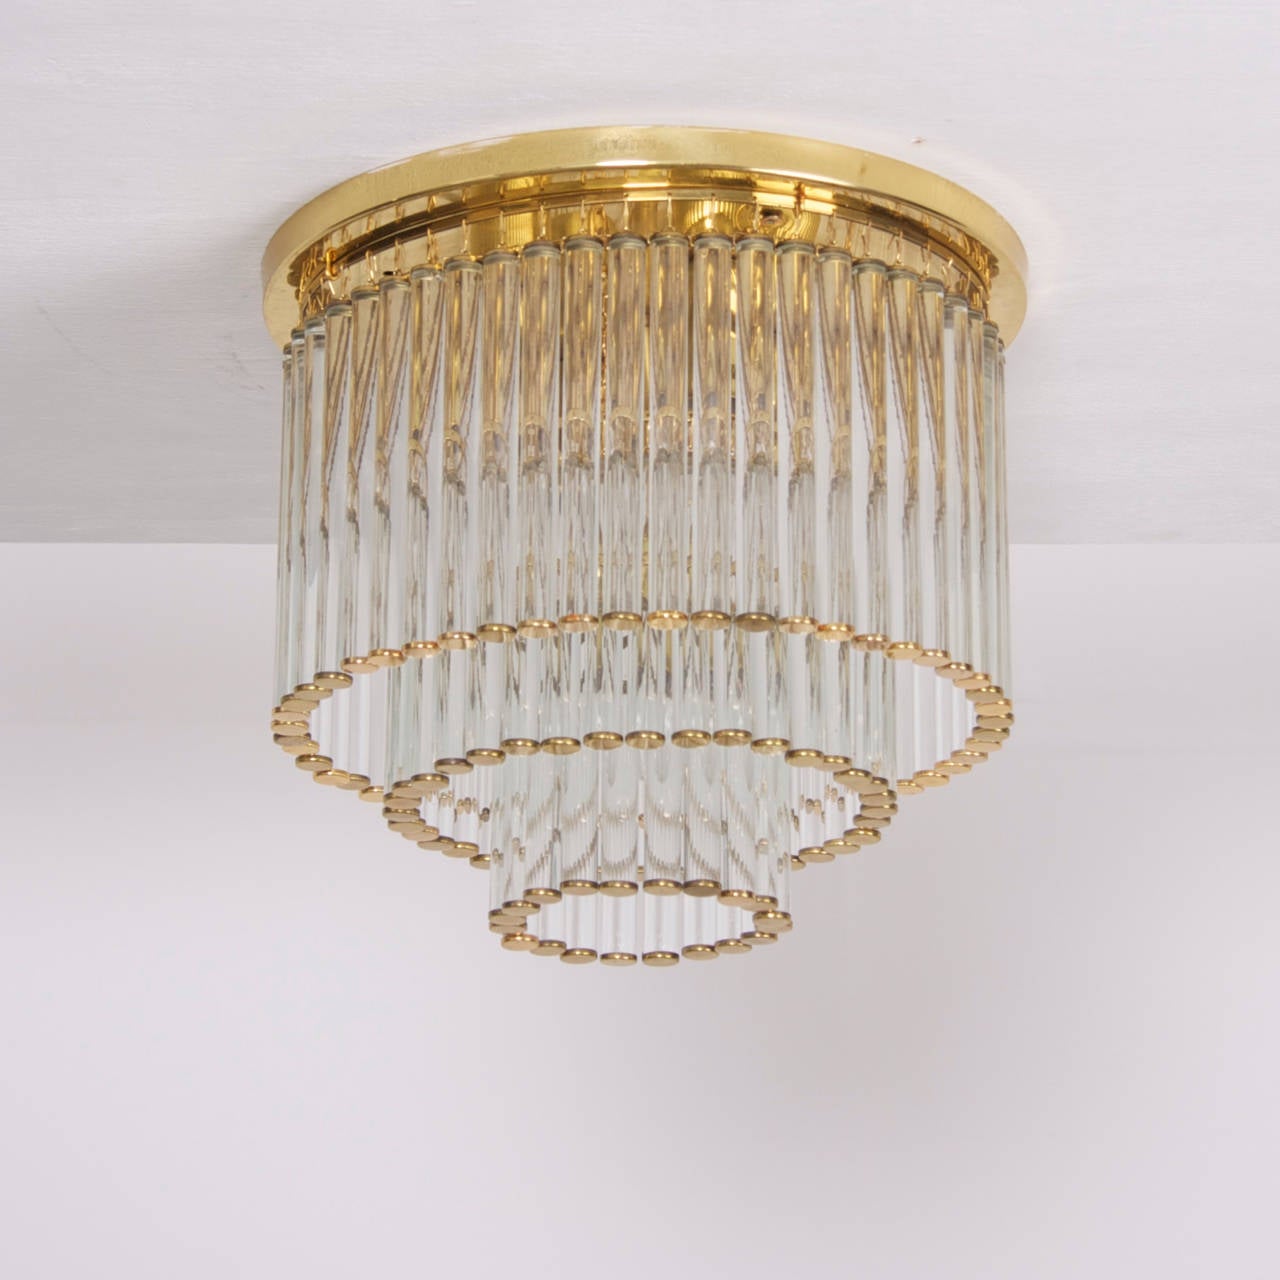 German Glass and Brass Flush Mount Fixture by Ernst Palme in the Manner of Venini For Sale